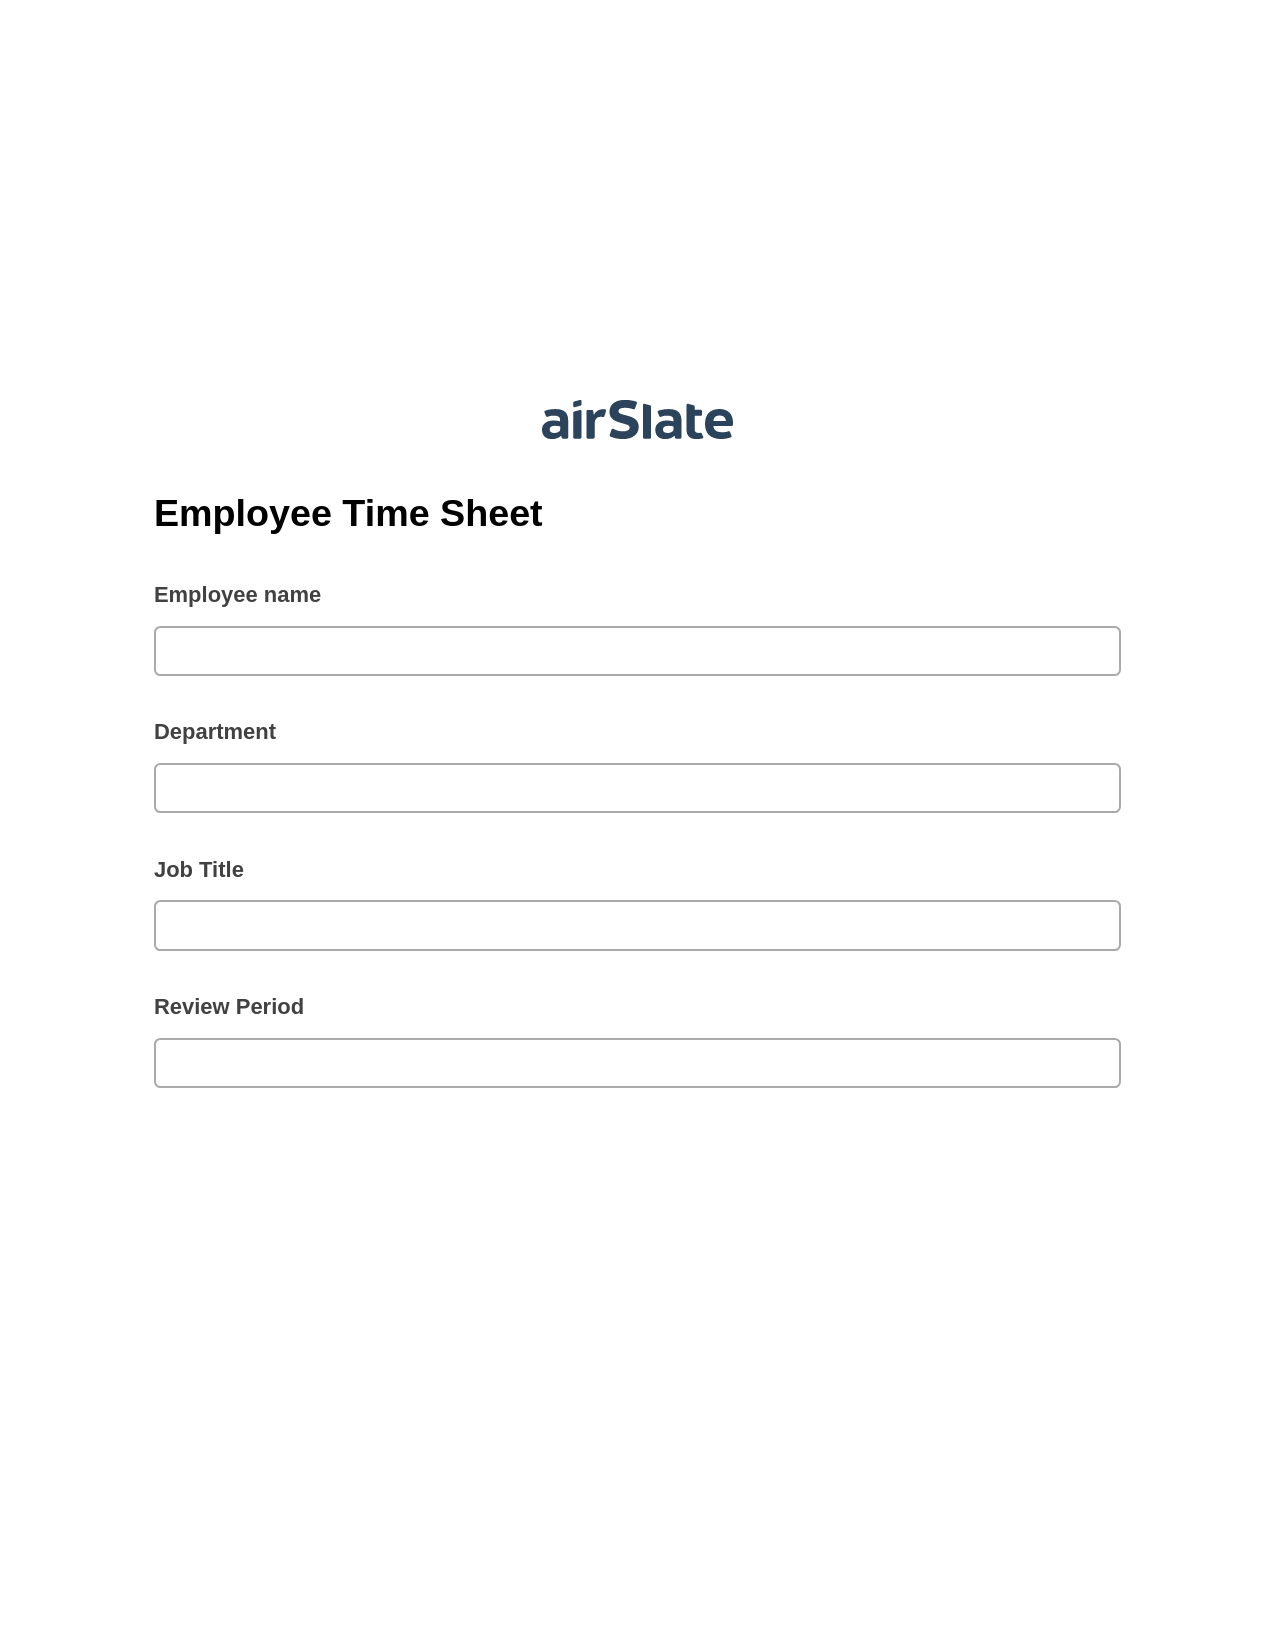 Multirole Employee Time Sheet Pre-fill from Salesforce Records Bot, Update Audit Trail Bot, Export to Smartsheet